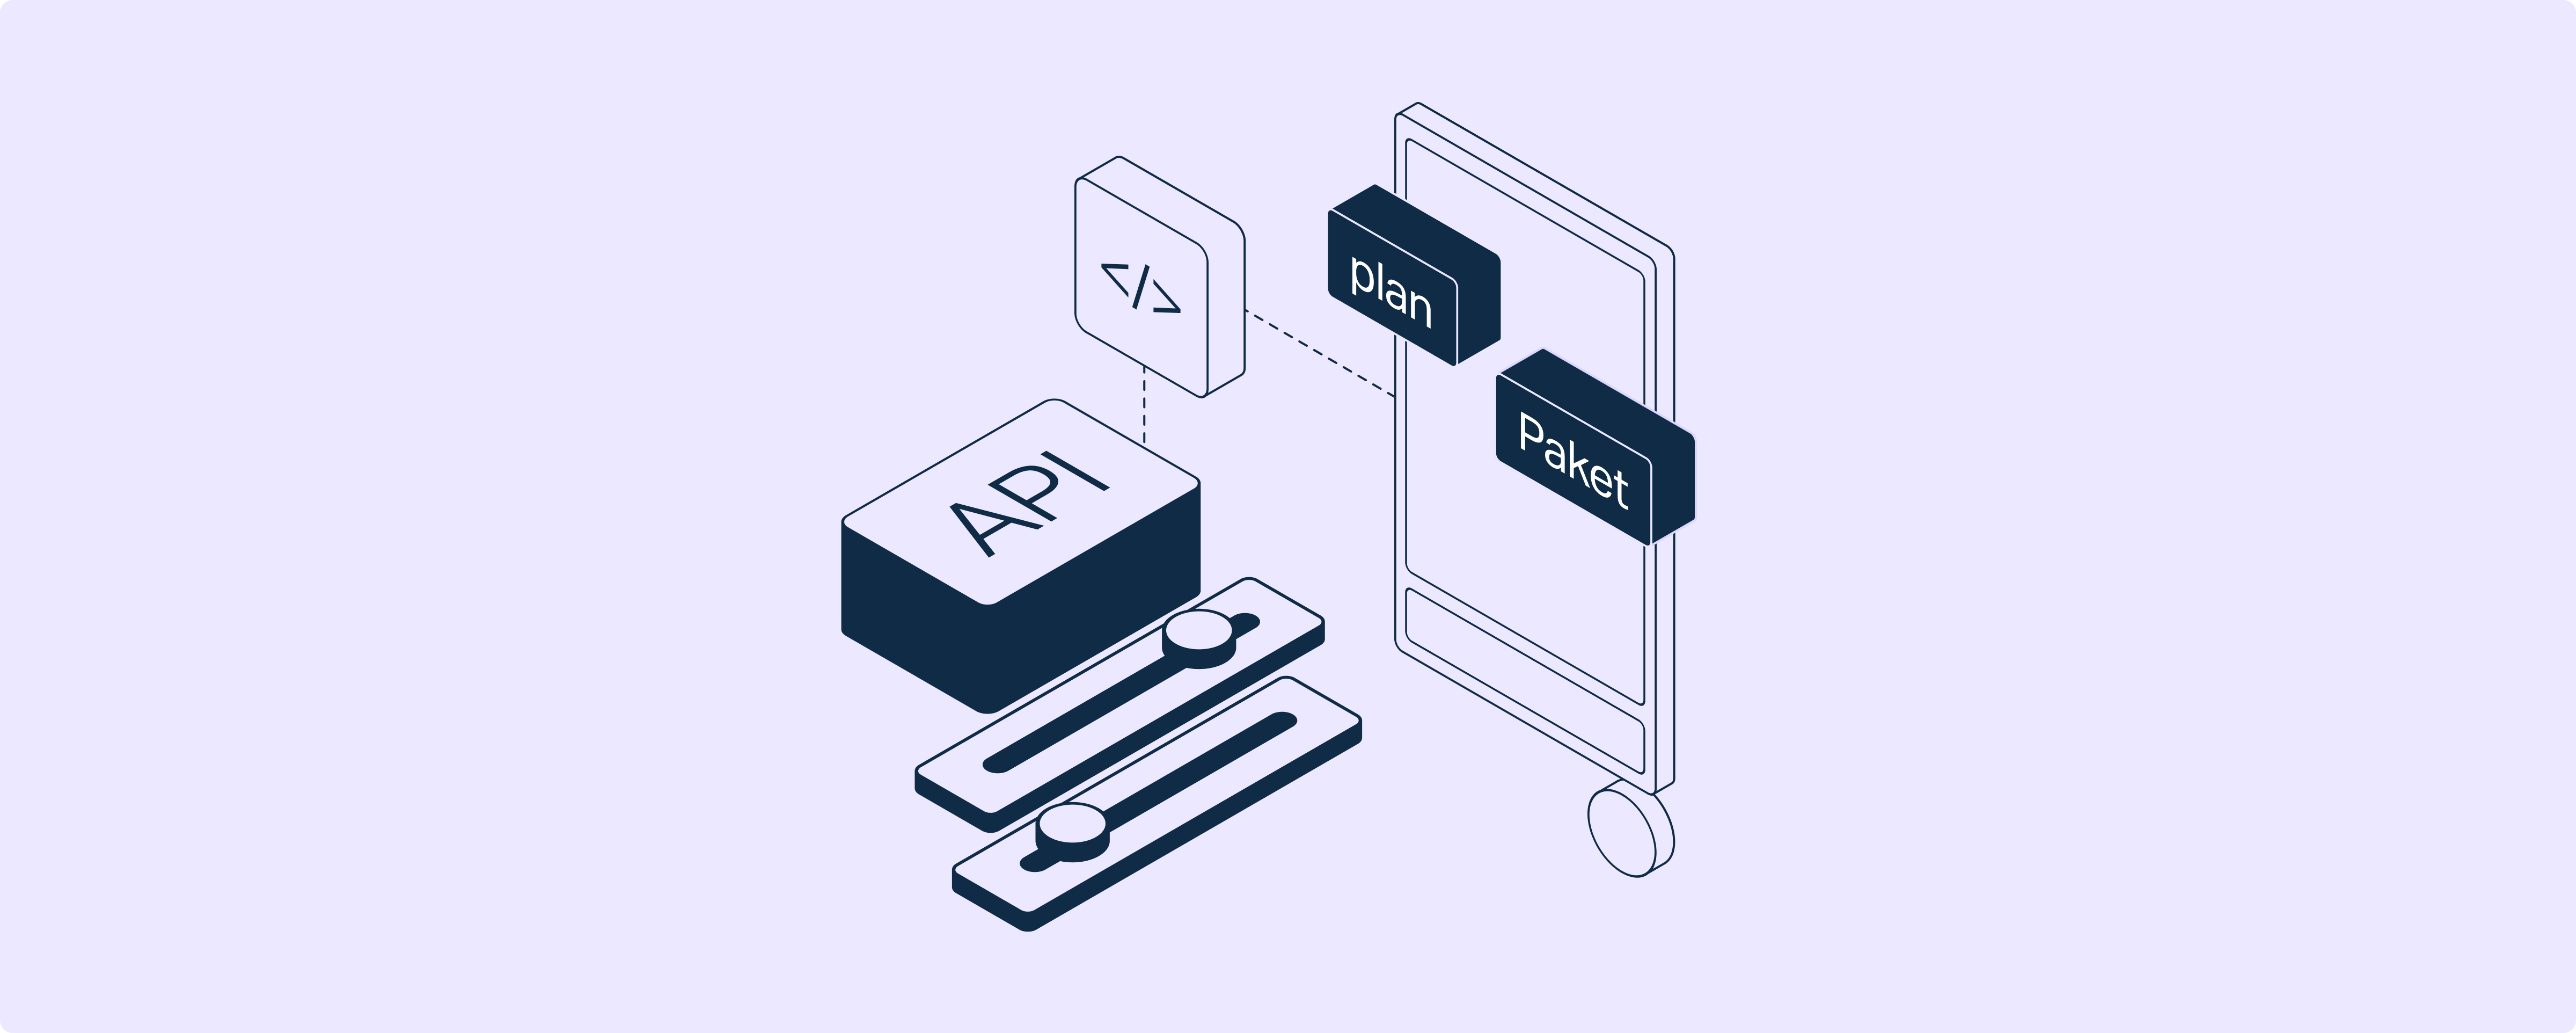 Illustration of API with "plan" and "Paket"